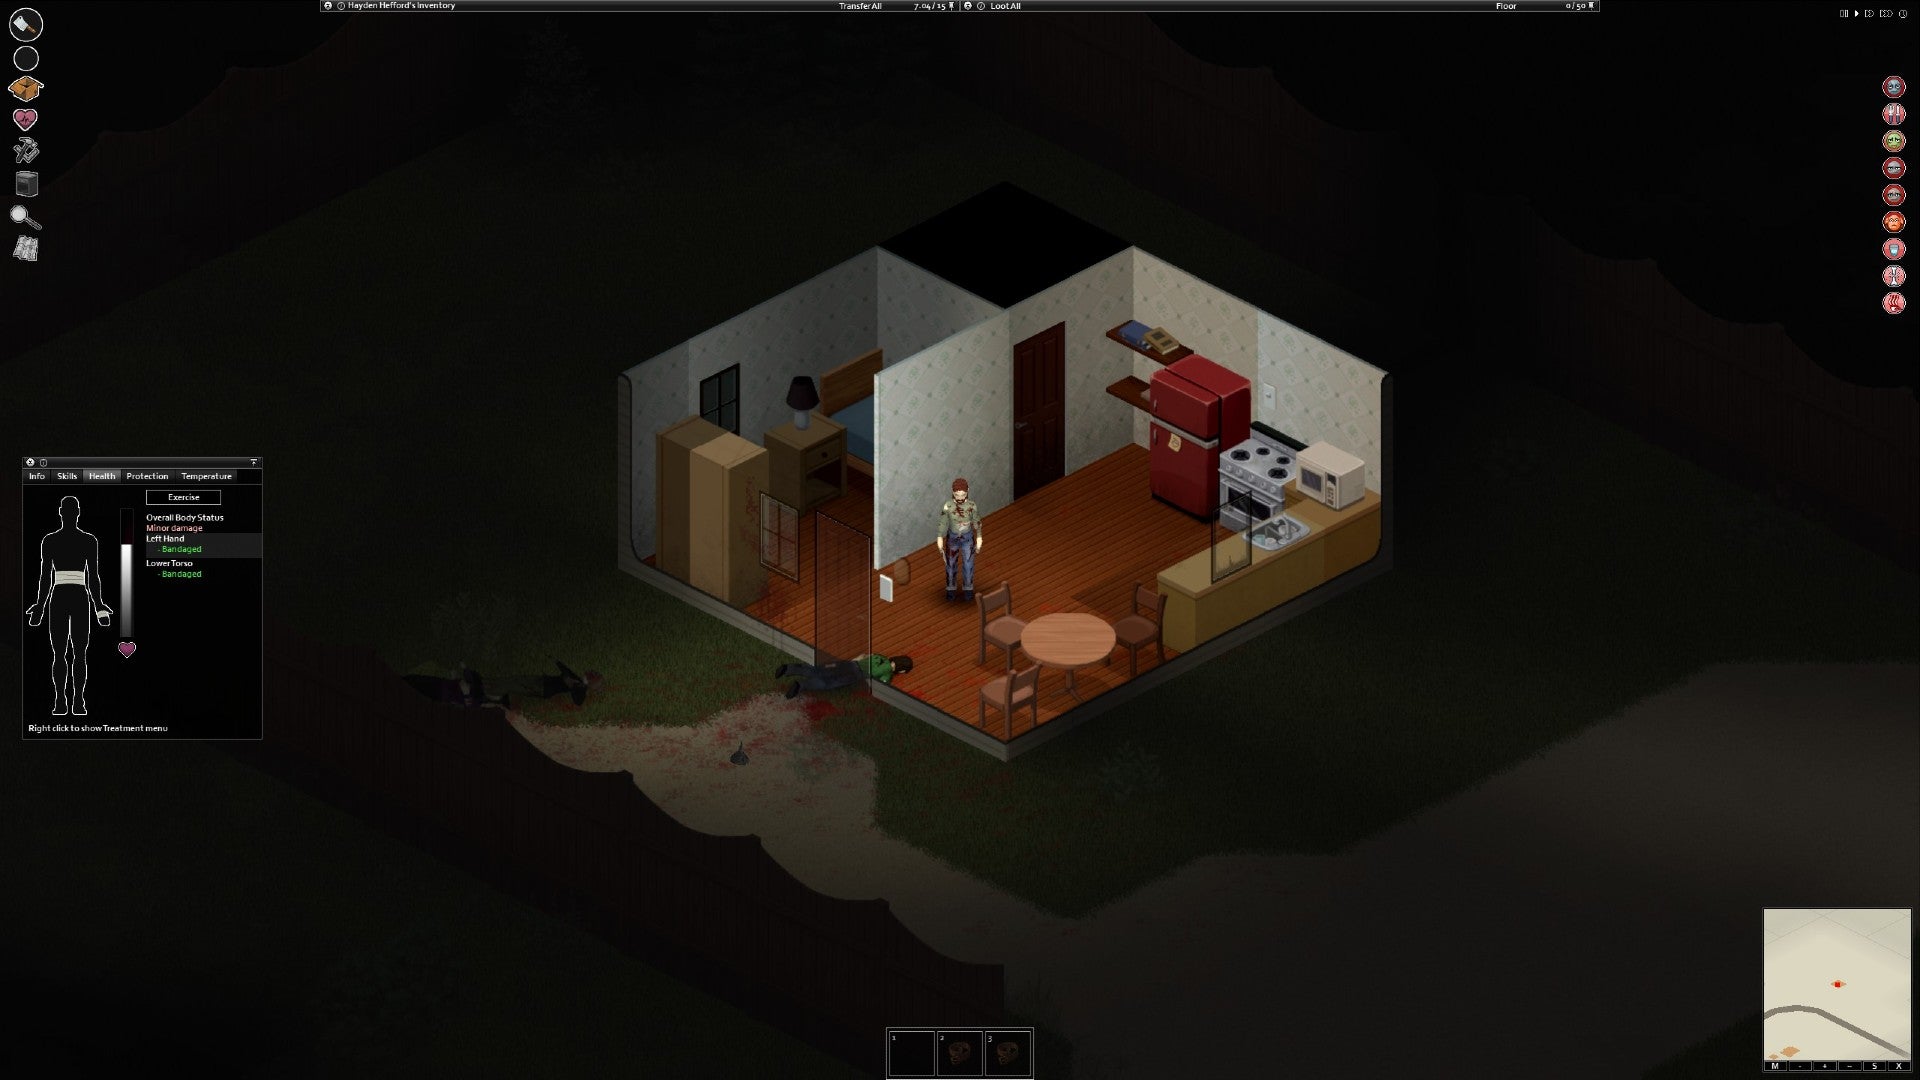 Project Zomboid player stands in a building covered in blood. He has several lacerations and zombie scratches. The moodlets indicate he is becoming a zombie, as he is nauseous but no infection is listed.